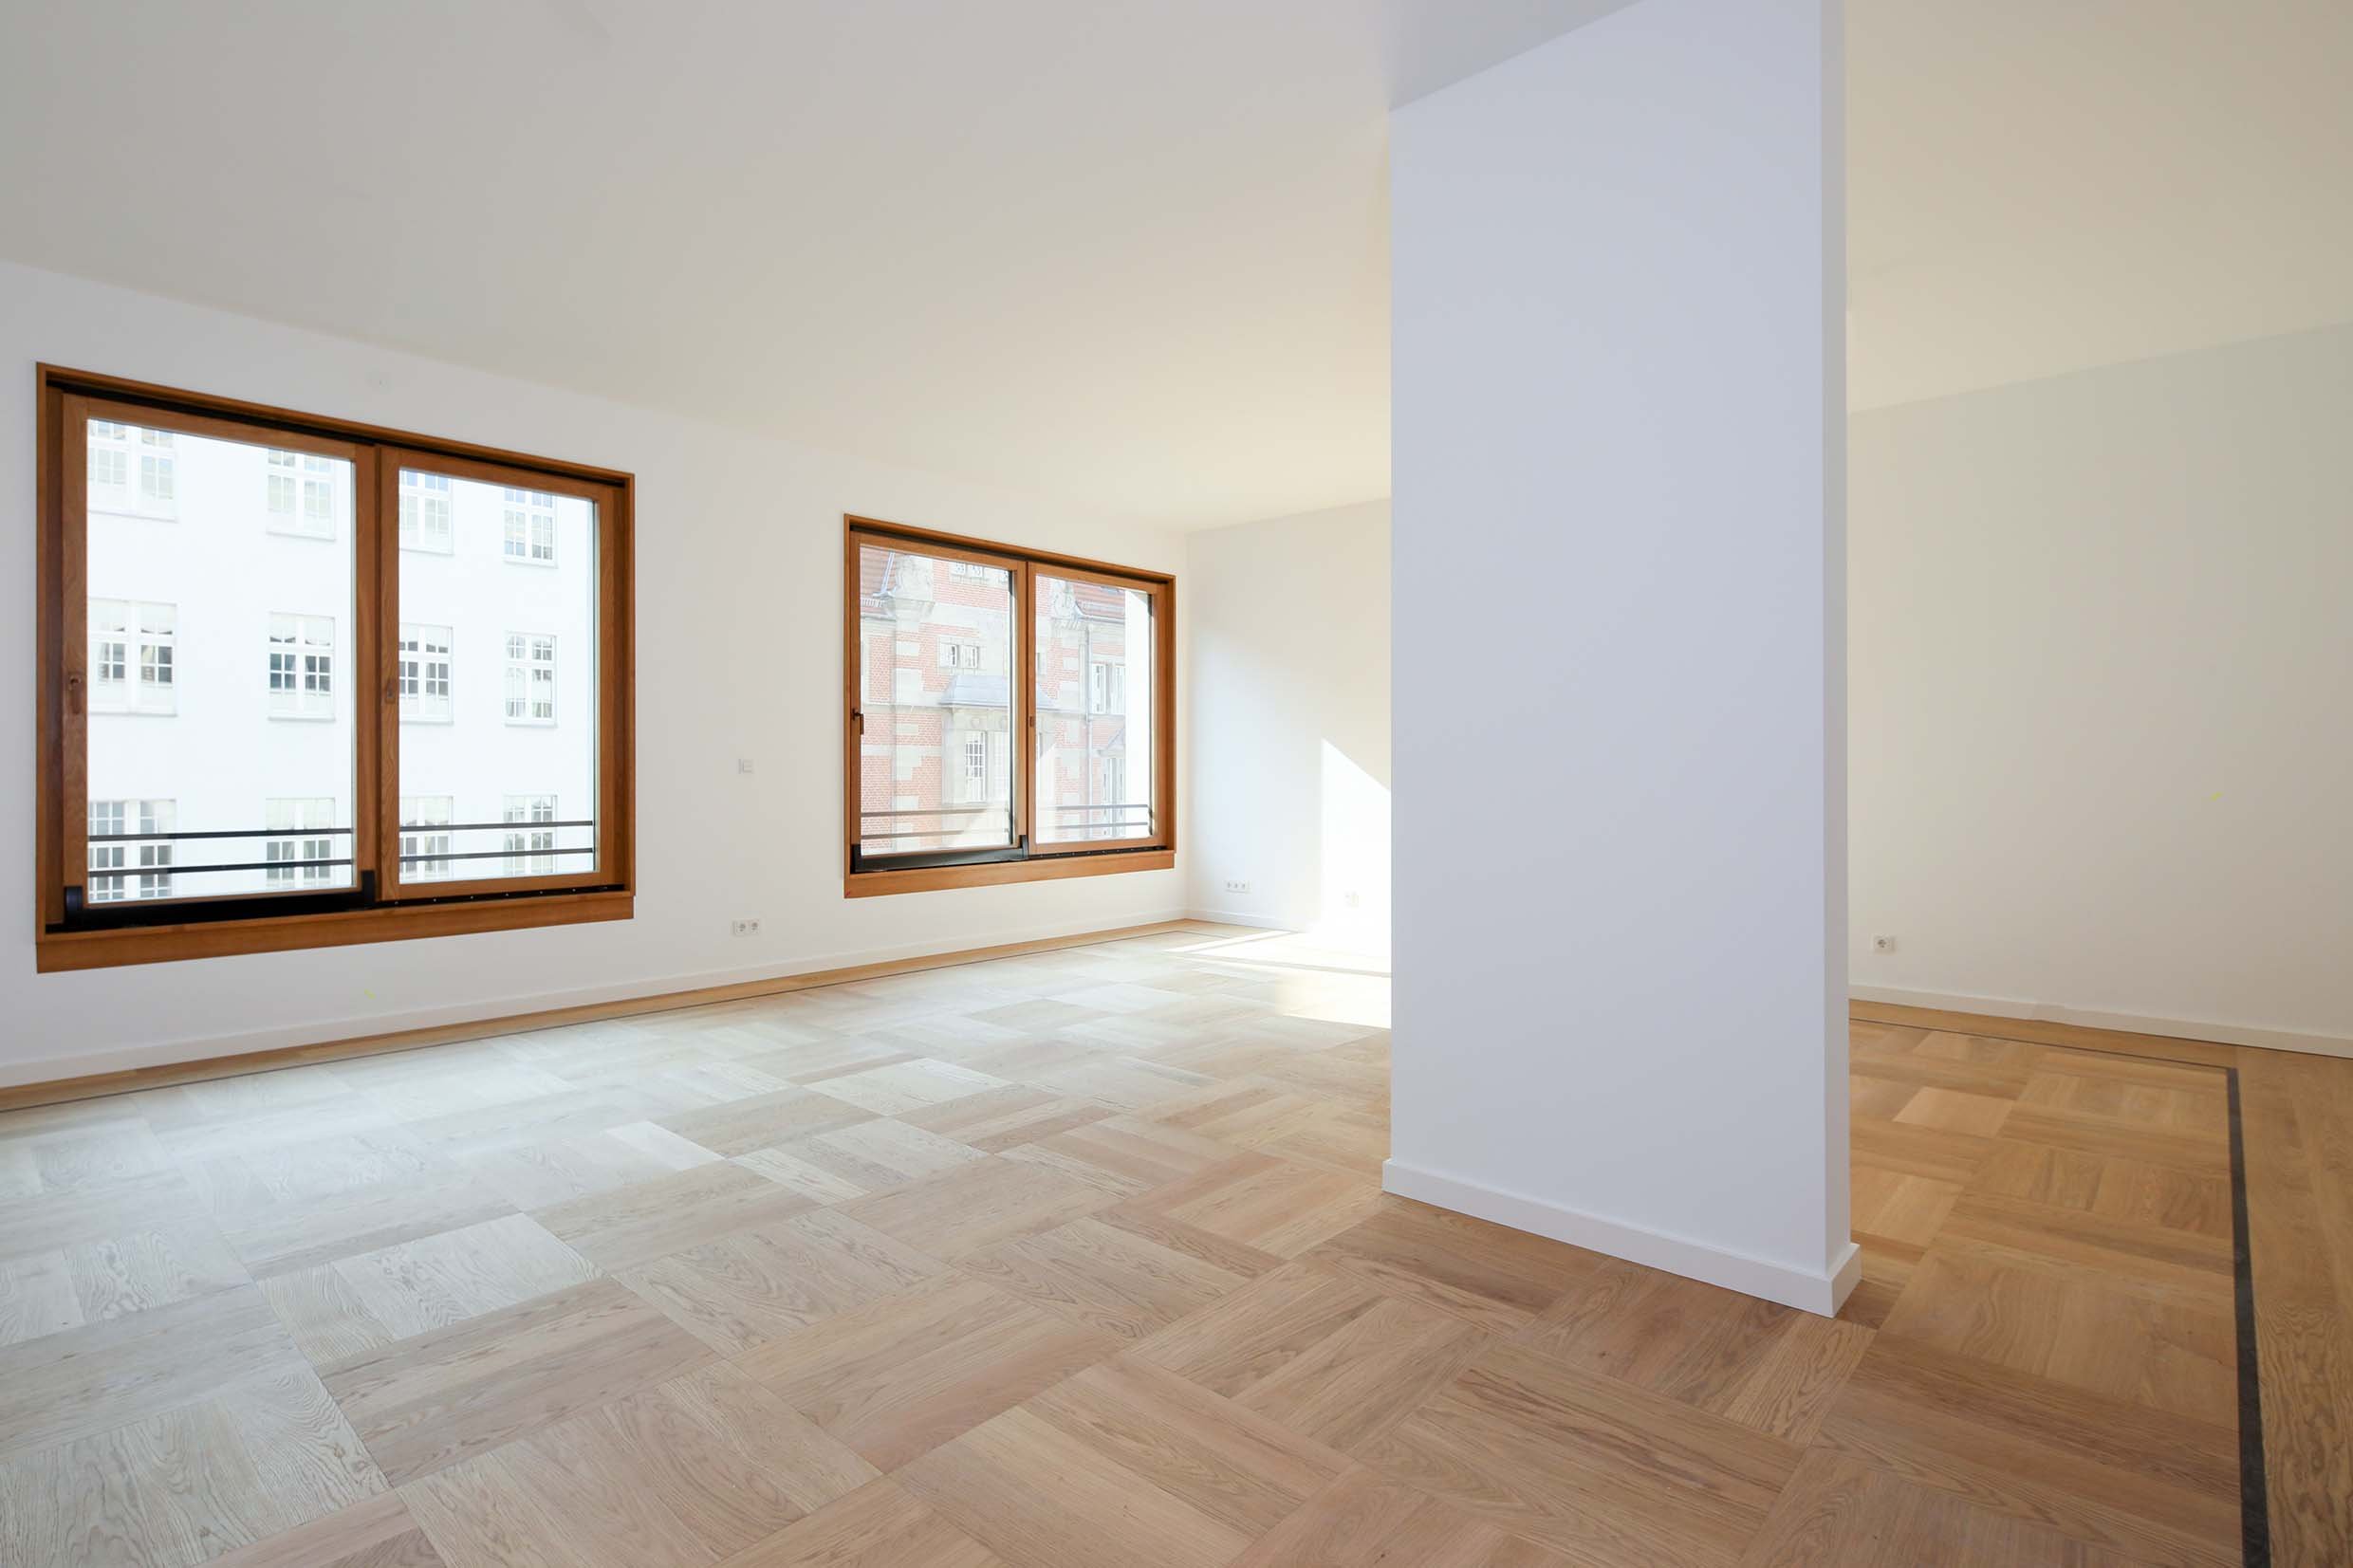 Palais Varnhagen by David Chipperfield successfully sold by Rabitz Property Consulting